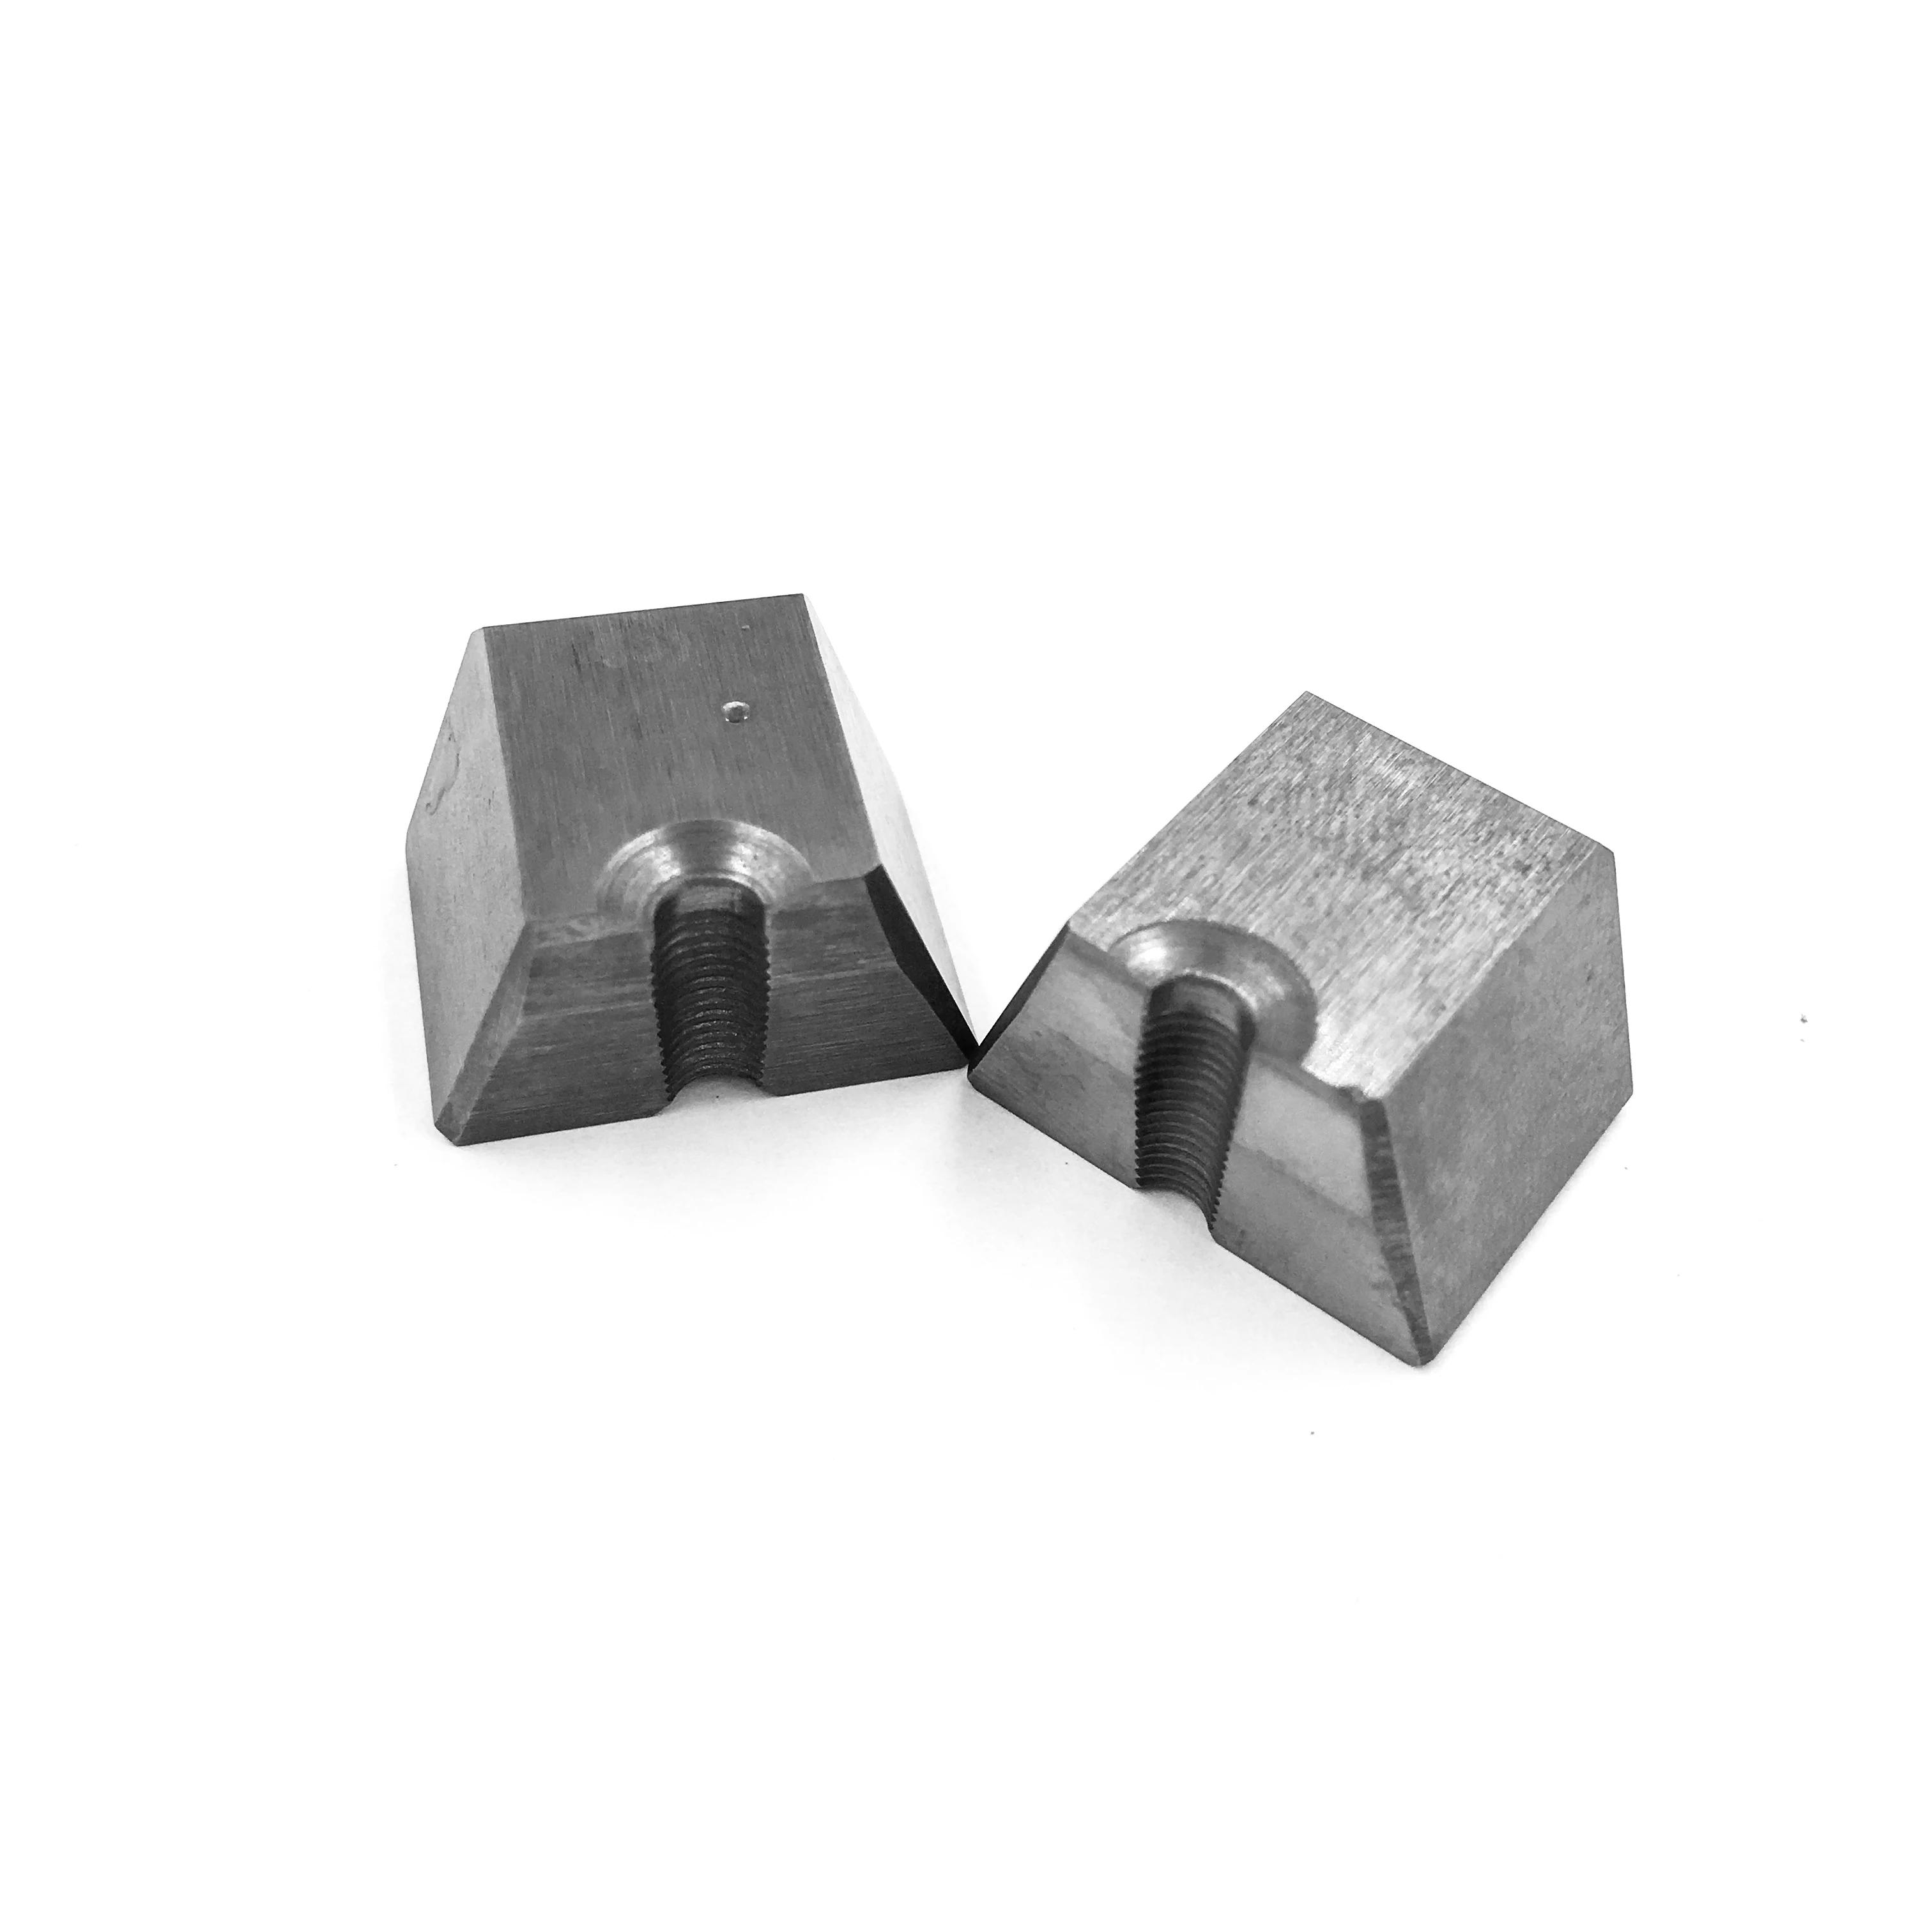 Polishing Pipe Threading Dies 4 Thread wire-drawing dies for raw tungsten carbide material